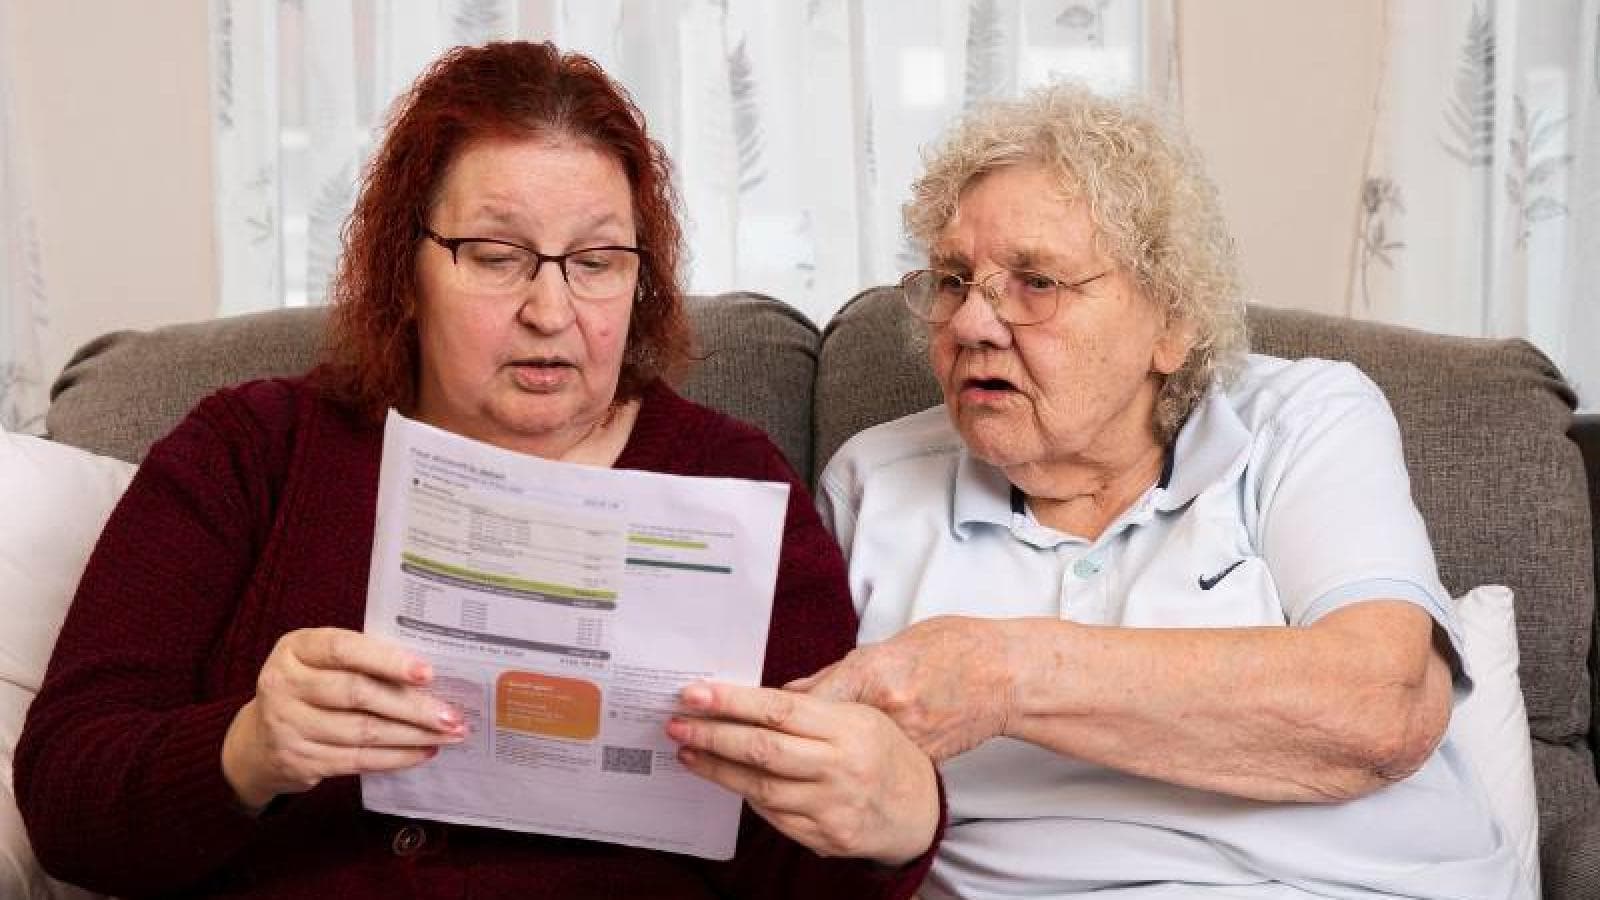 Two women are talking about some paperwork.